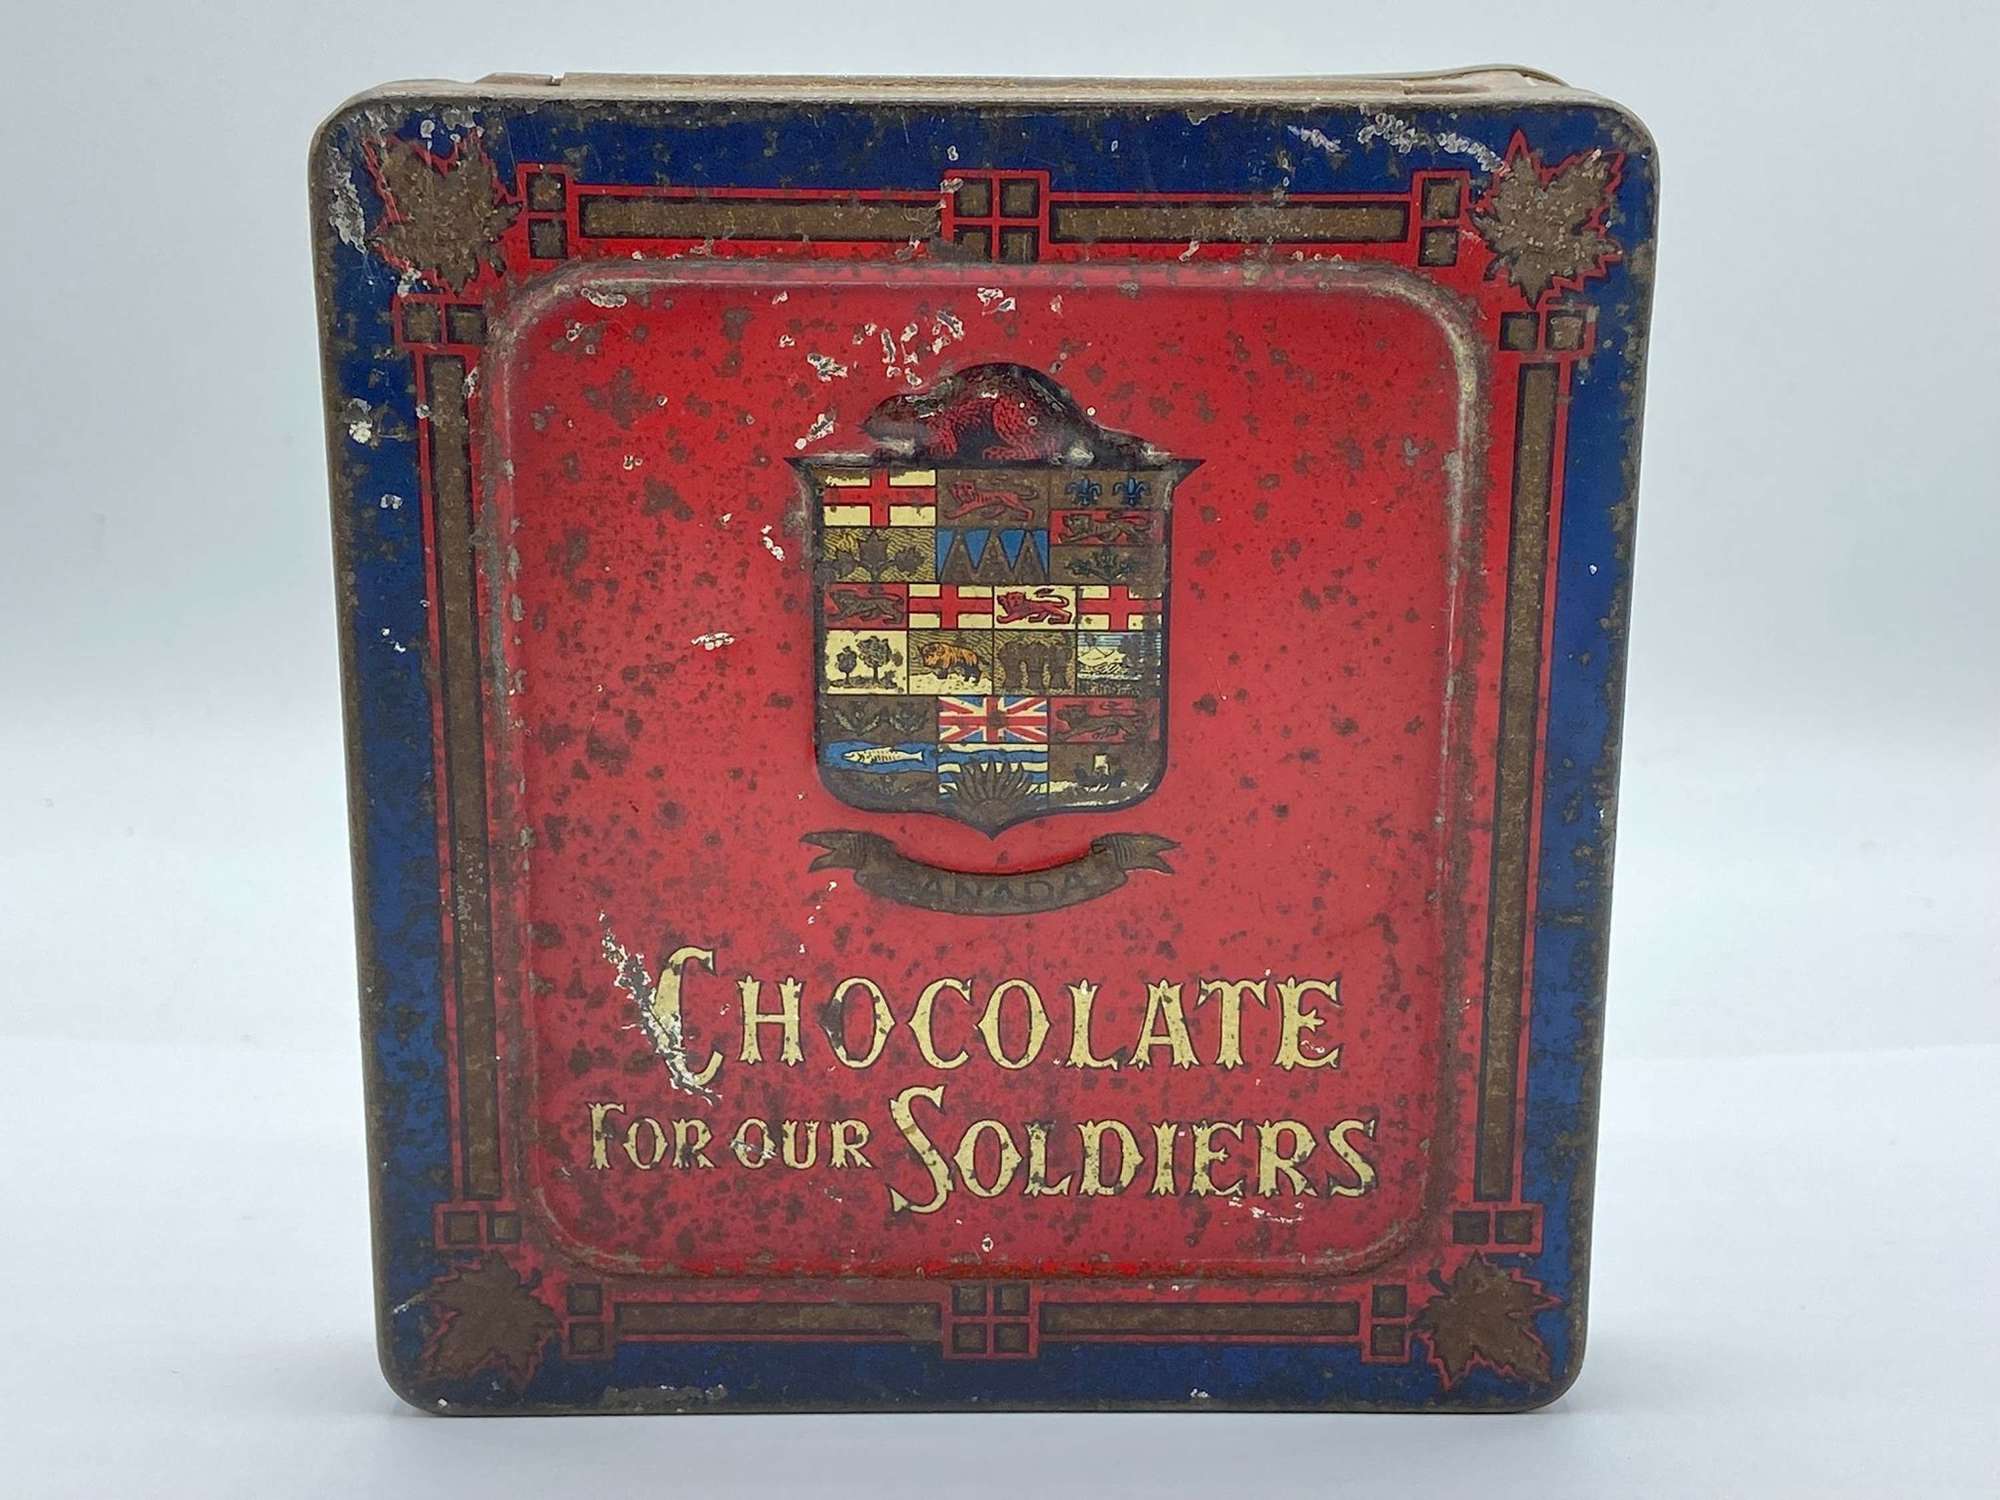 WW1 Canadian “Chocolate For Our Soldiers” Tin By Cowan Chocolate Co